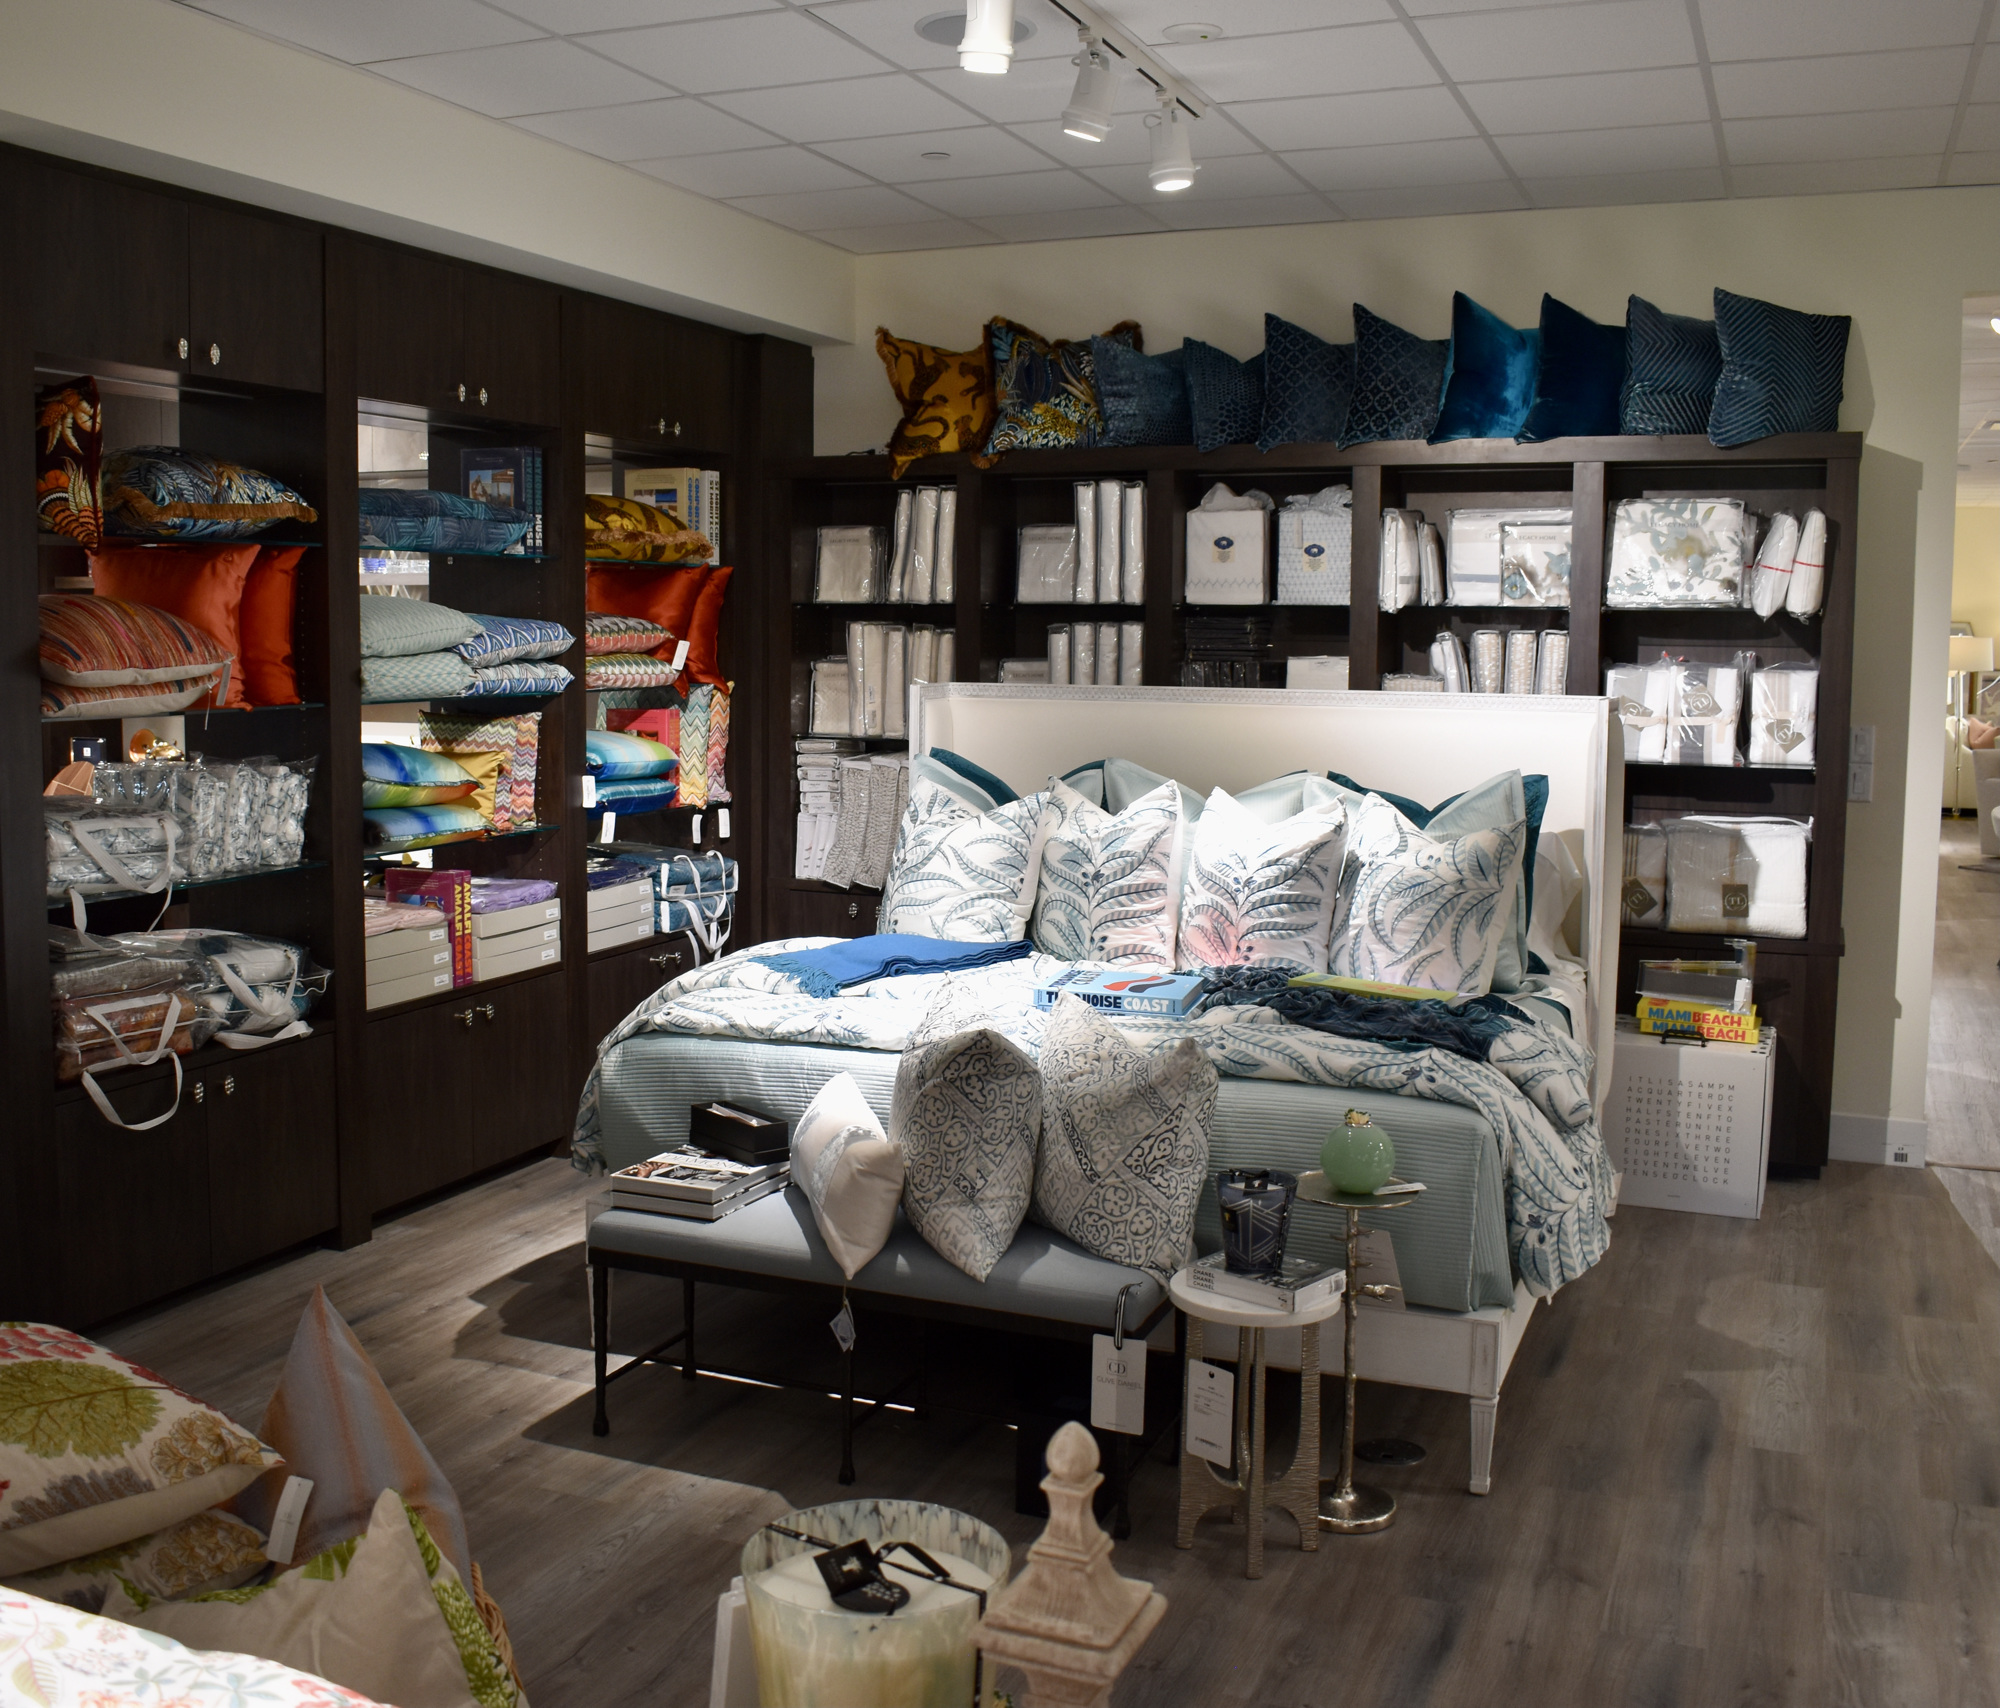 The Boutique portion of the showroom offers a selection of such items as linens, candles and other items. (Photo by Eric Garwood)